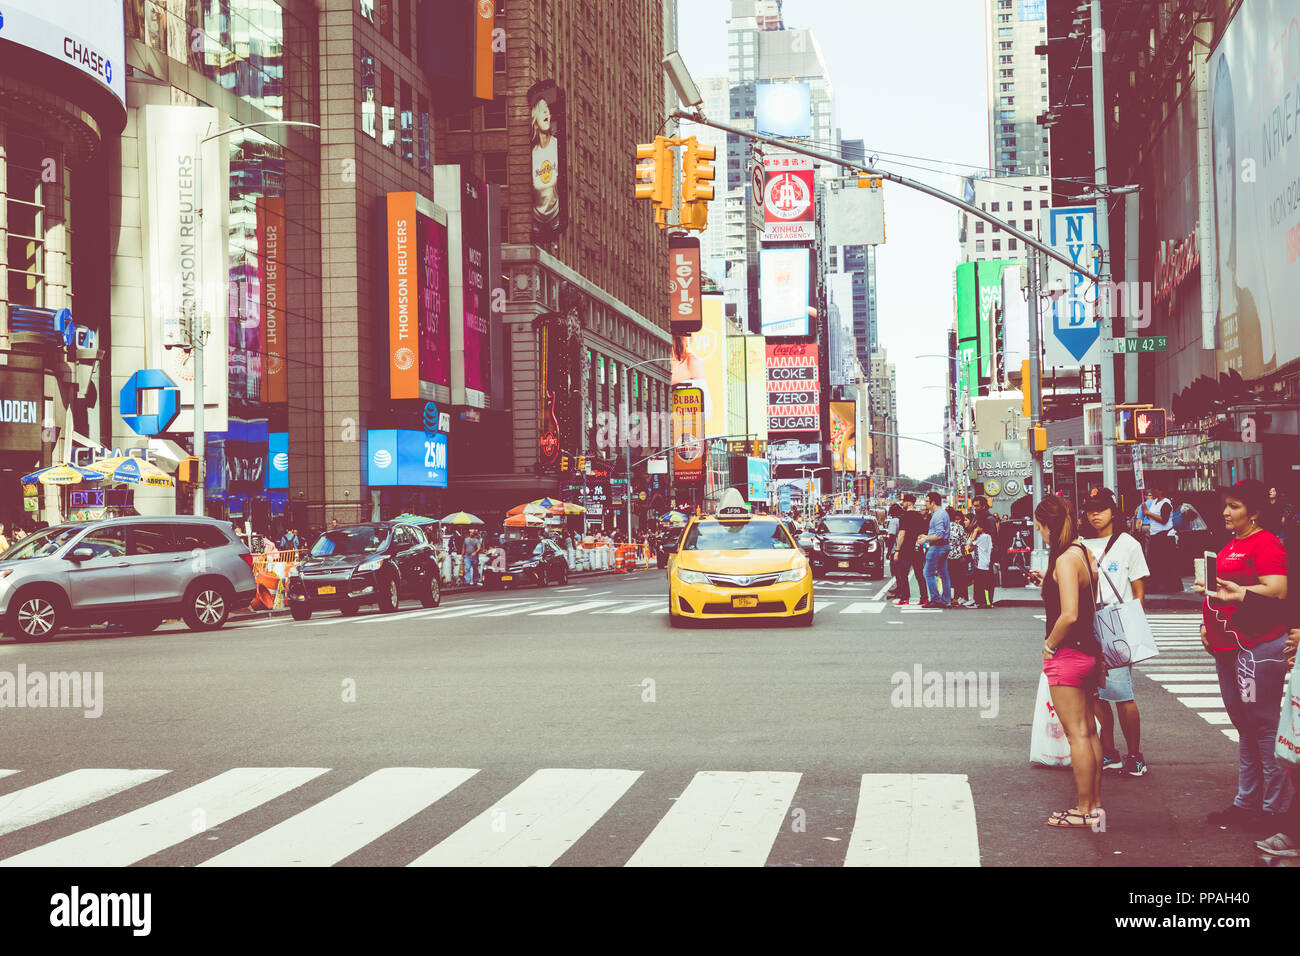 NEW YORK - SEPTEMBER 2, 2018: New York City street road in Manhattan at summer time, many cars, yellow taxis and busy people walk to work. Stock Photo